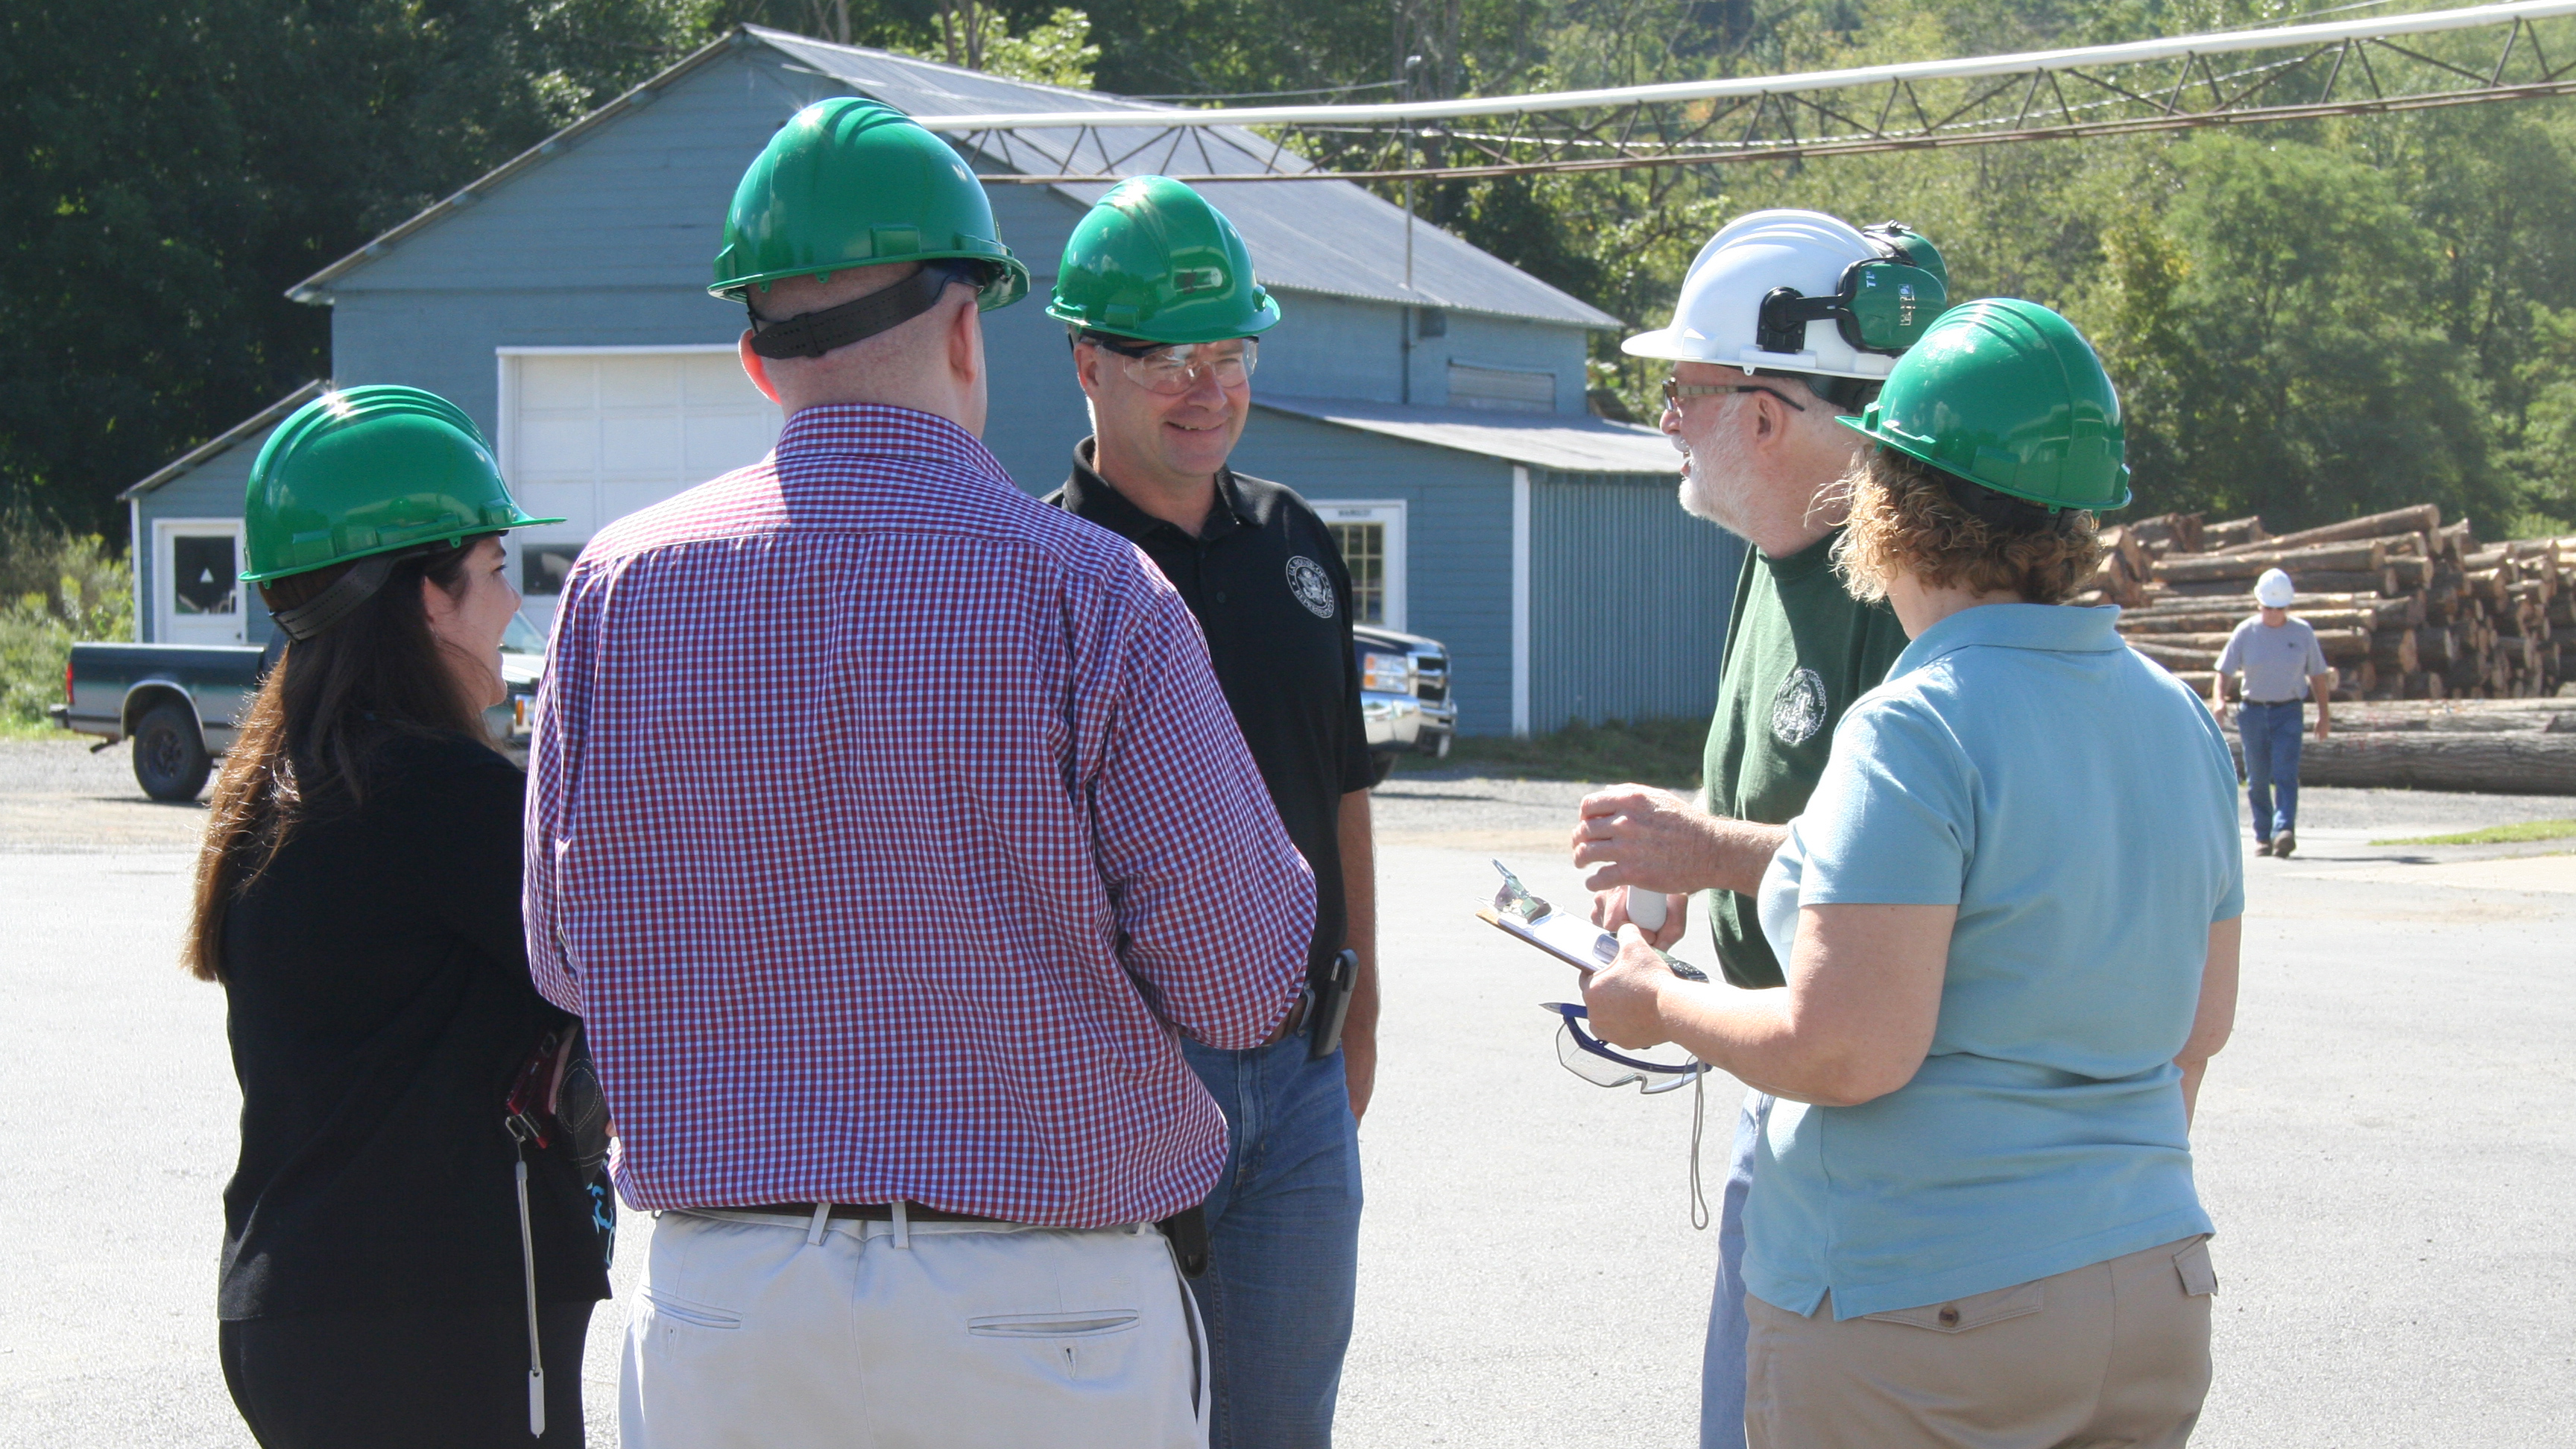 Rep. Chris Gibson of New York (R, 19th District), lead co-sponsor of the POWER Act, joins Pew’s Jessica Lubetsky on a tour of a waste heat to power project at Wightman Lumber in Portlandville, New York (Aug. 29, 2014).